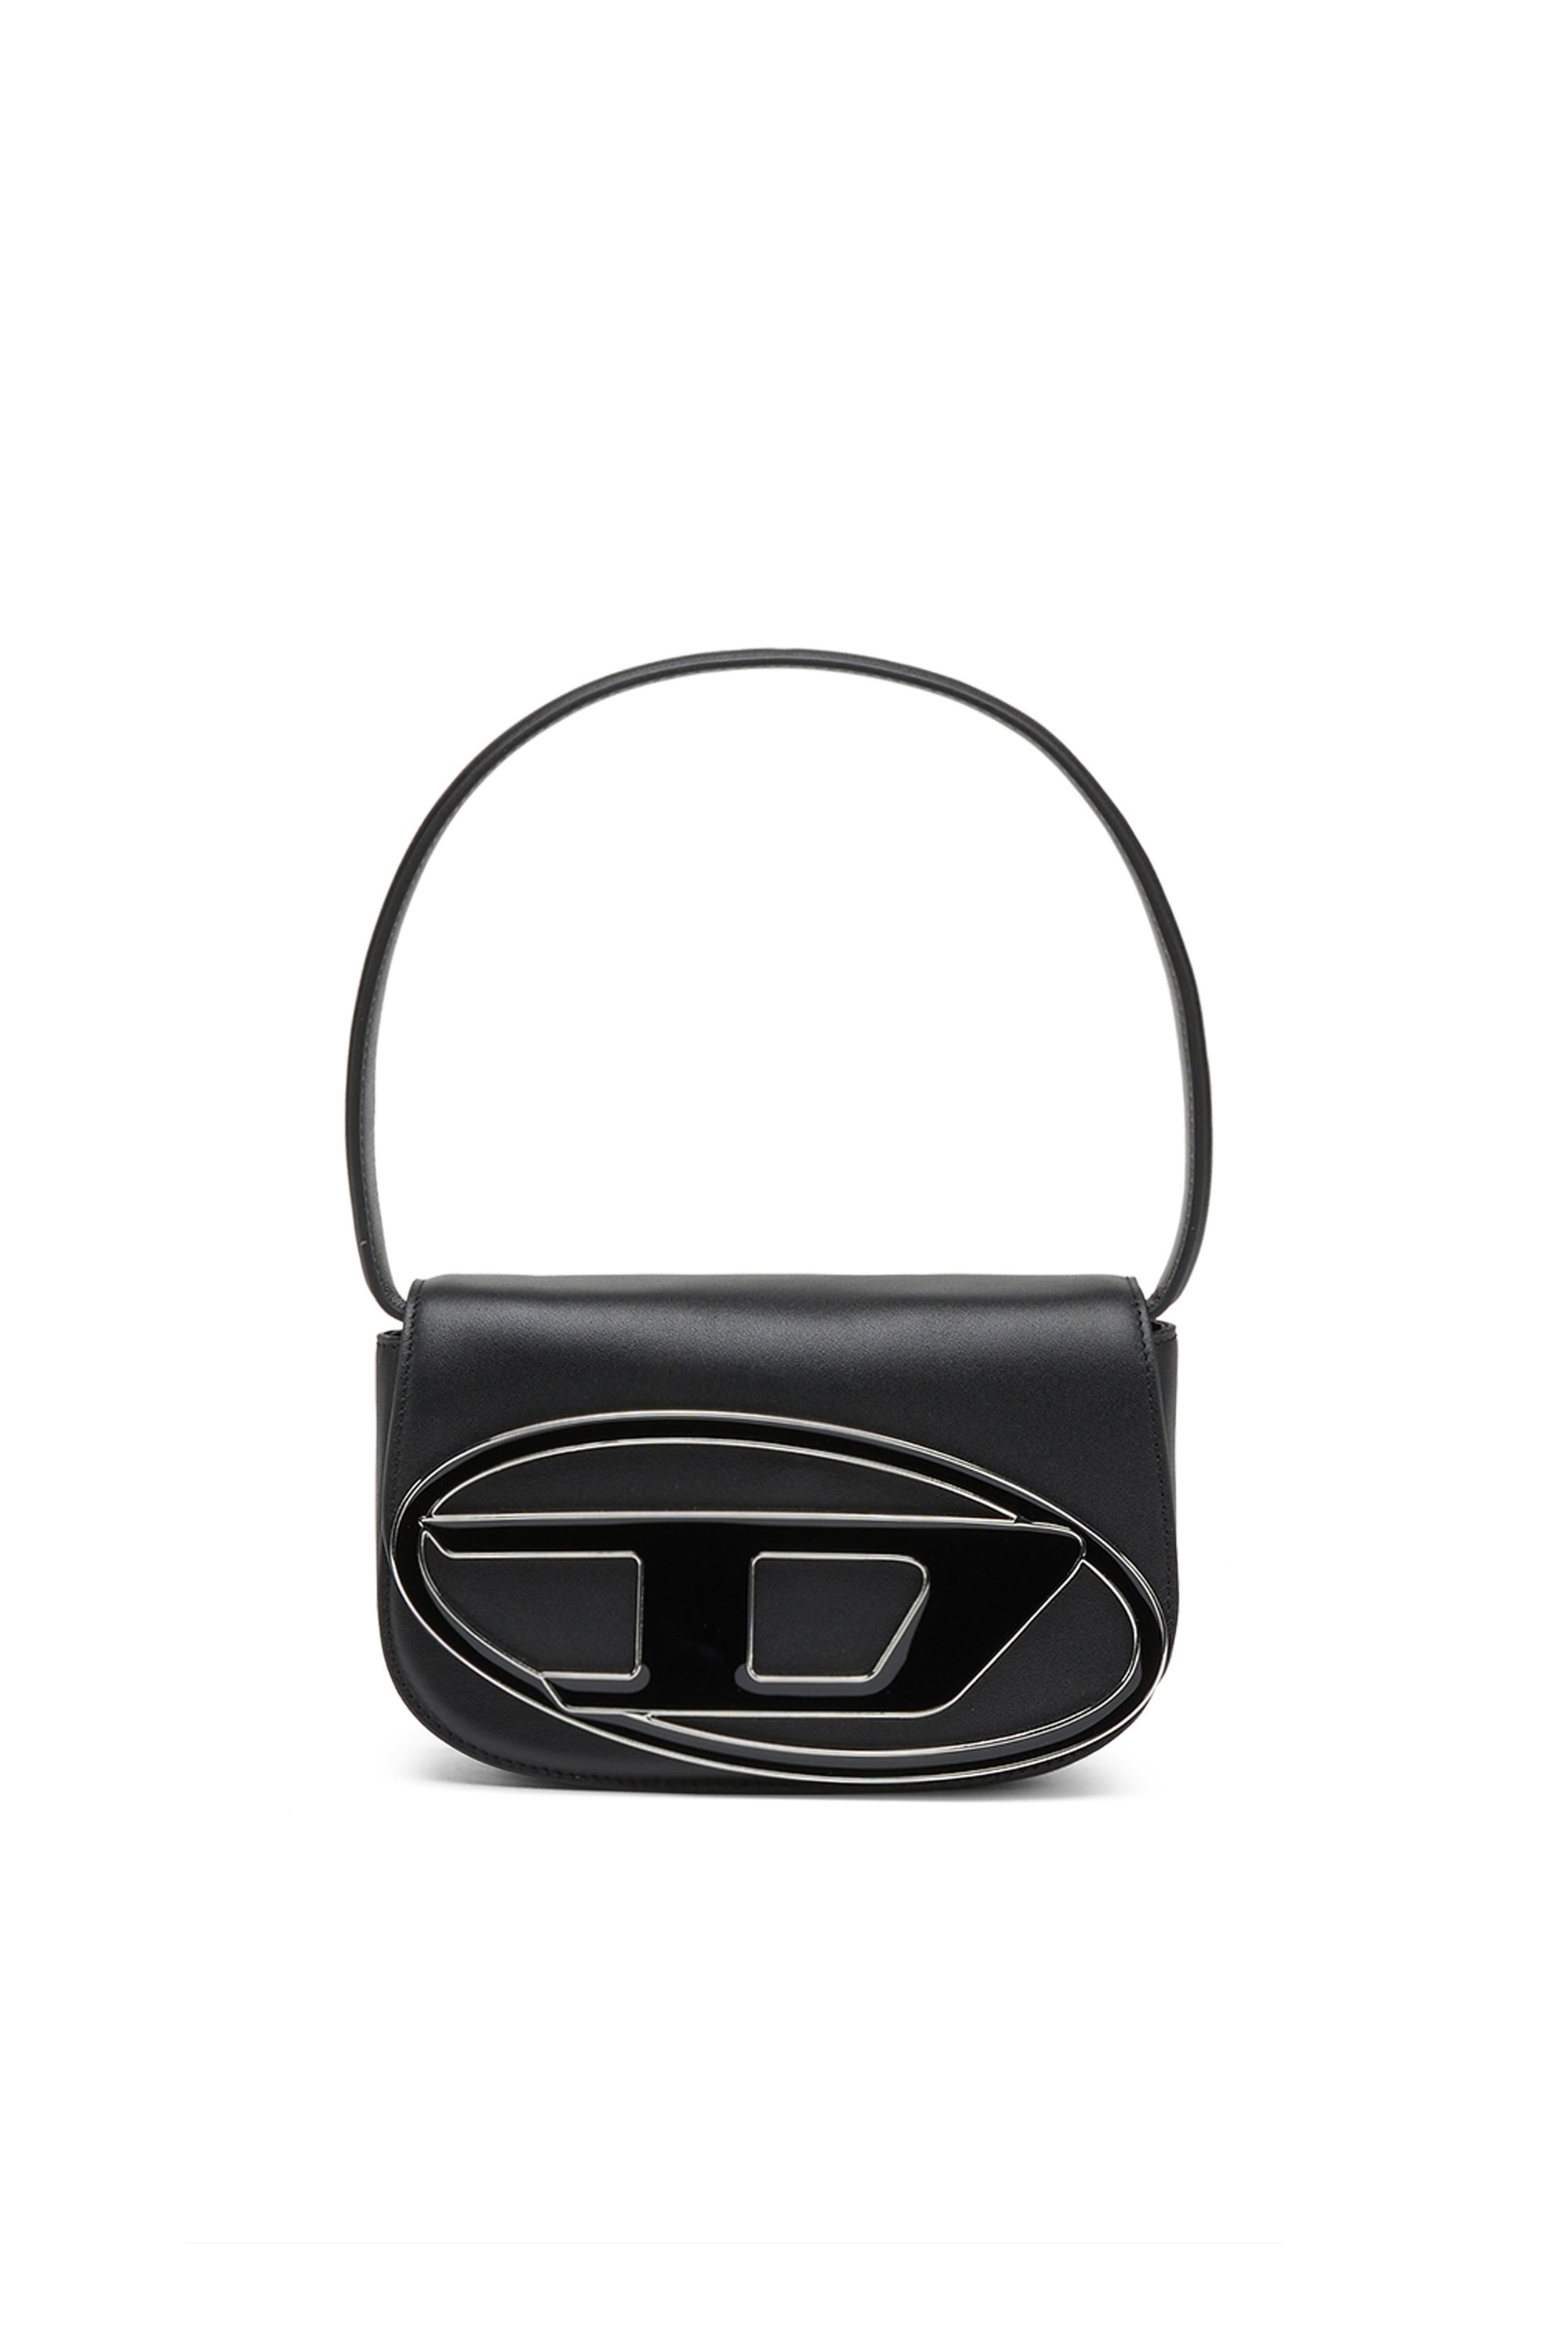 1DR Woman: Shoulder bag in mirrored leather | Diesel